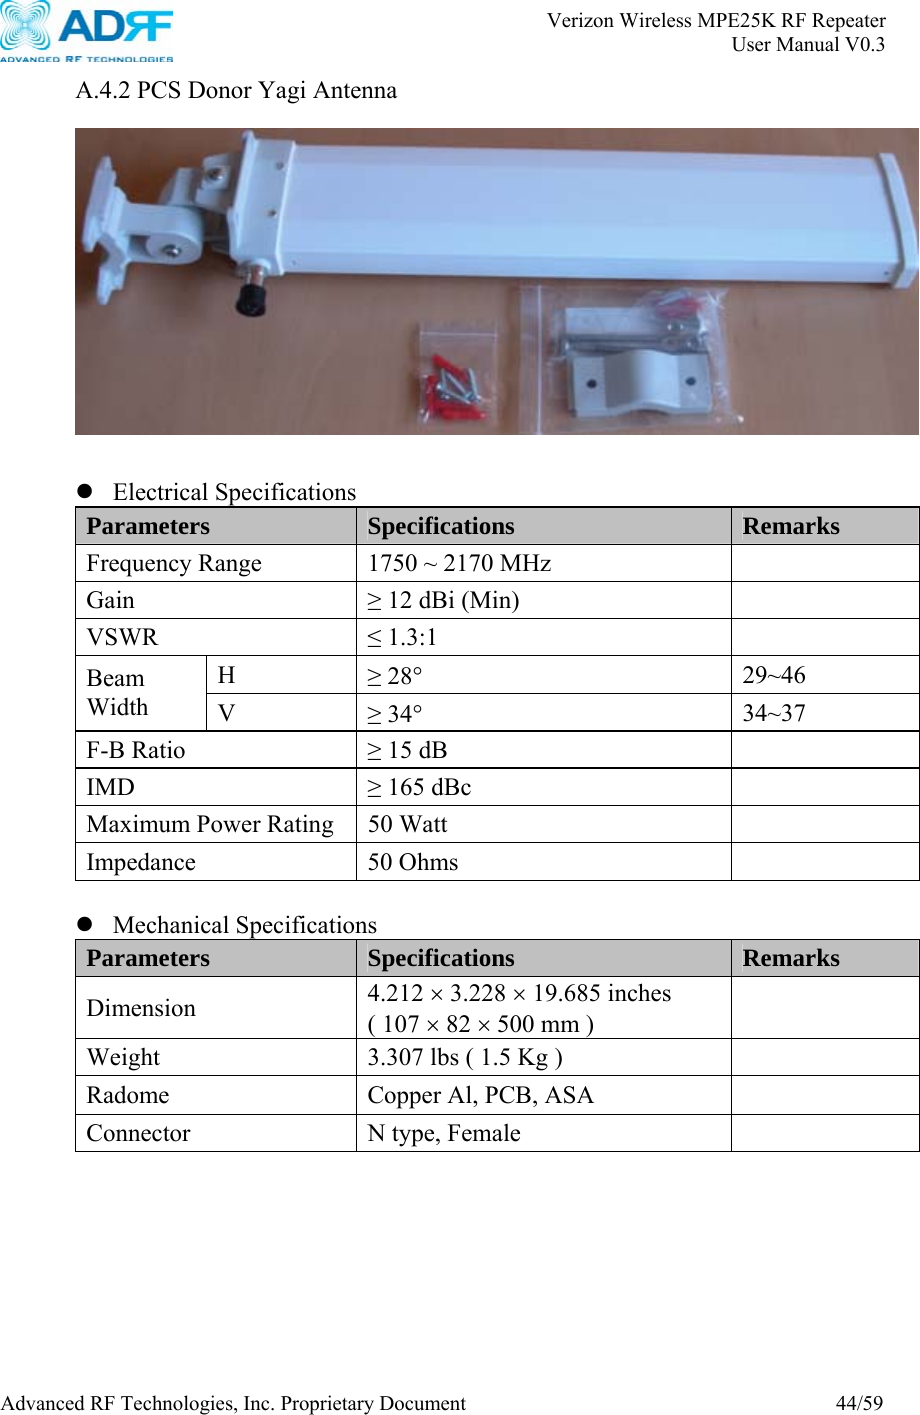       Verizon Wireless MPE25K RF Repeater   User Manual V0.3 Advanced RF Technologies, Inc. Proprietary Document  44/59 A.4.2 PCS Donor Yagi Antenna     z Electrical Specifications Parameters  Specifications Remarks Frequency Range  1750 ~ 2170 MHz   Gain  ≥ 12 dBi (Min)   VSWR  ≤ 1.3:1   H  ≥ 28° 29~46 Beam Width  V  ≥ 34° 34~37 F-B Ratio  ≥ 15 dB   IMD  ≥ 165 dBc   Maximum Power Rating  50 Watt   Impedance 50 Ohms    z Mechanical Specifications Parameters  Specifications Remarks Dimension  4.212 × 3.228 × 19.685 inches ( 107 × 82 × 500 mm )   Weight  3.307 lbs ( 1.5 Kg )   Radome  Copper Al, PCB, ASA   Connector  N type, Female     